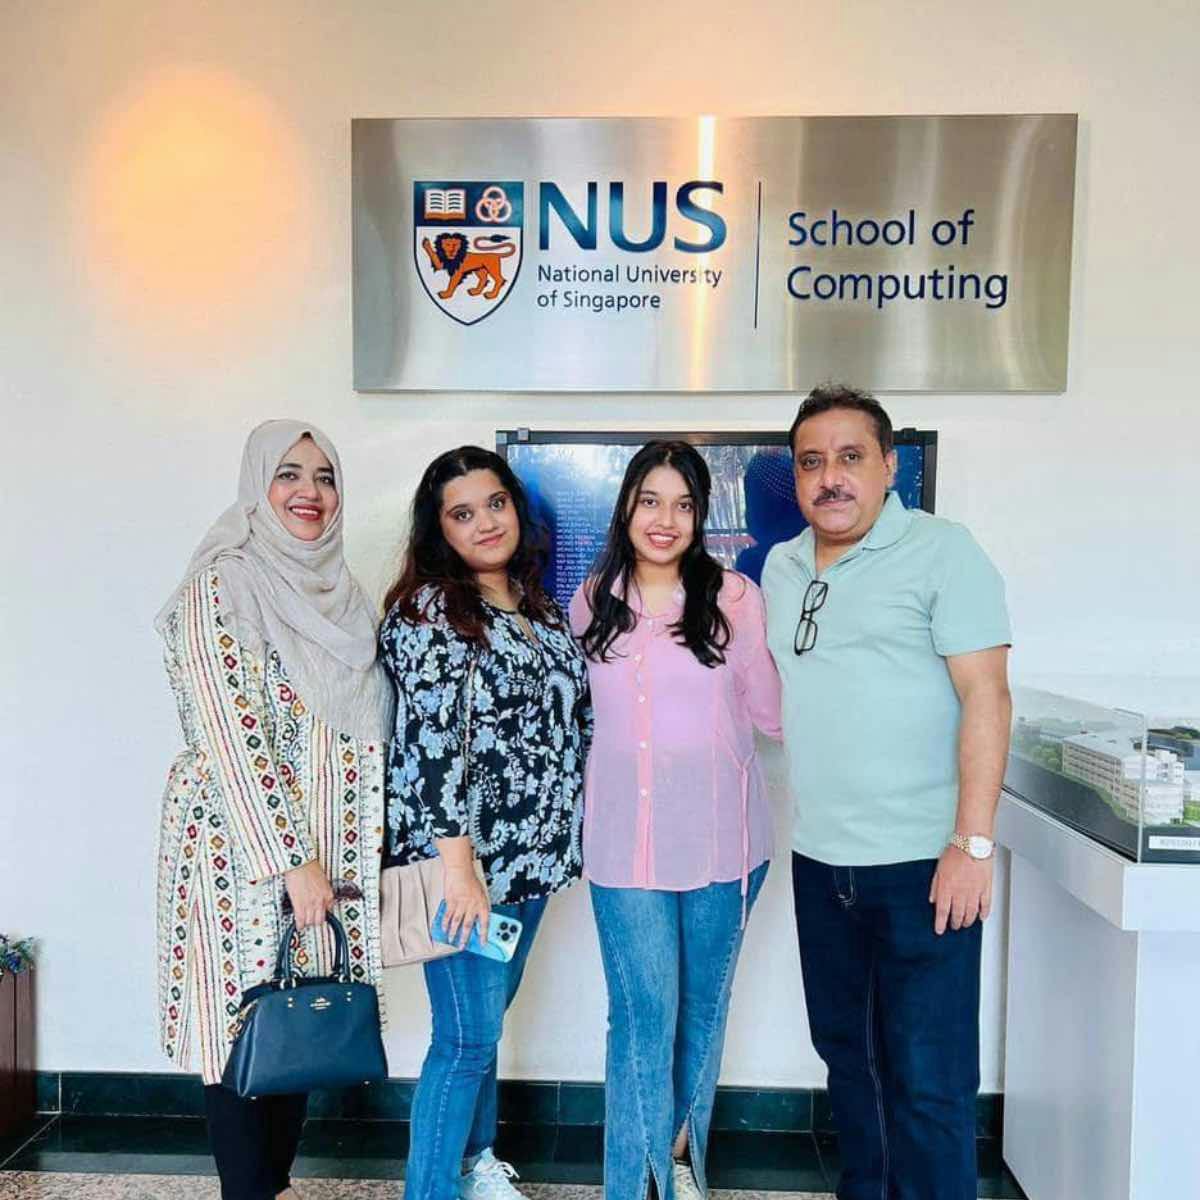 From Medical School in the UK to Singapore’s Number 1 University: How I ended up at NUS